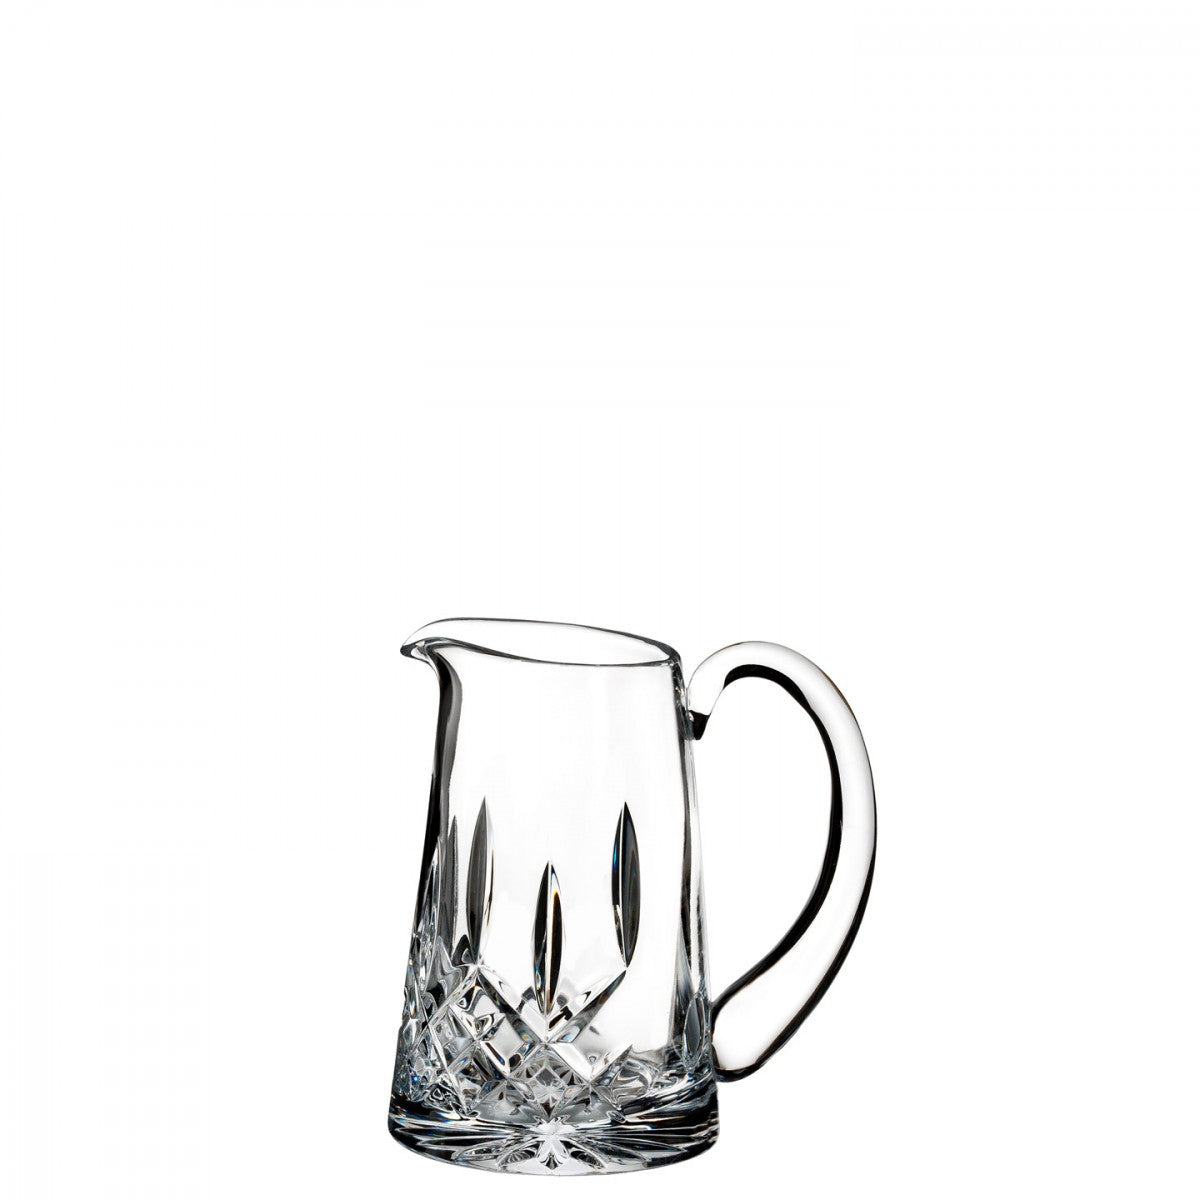 Lismore Tiny Pitcher by Waterford